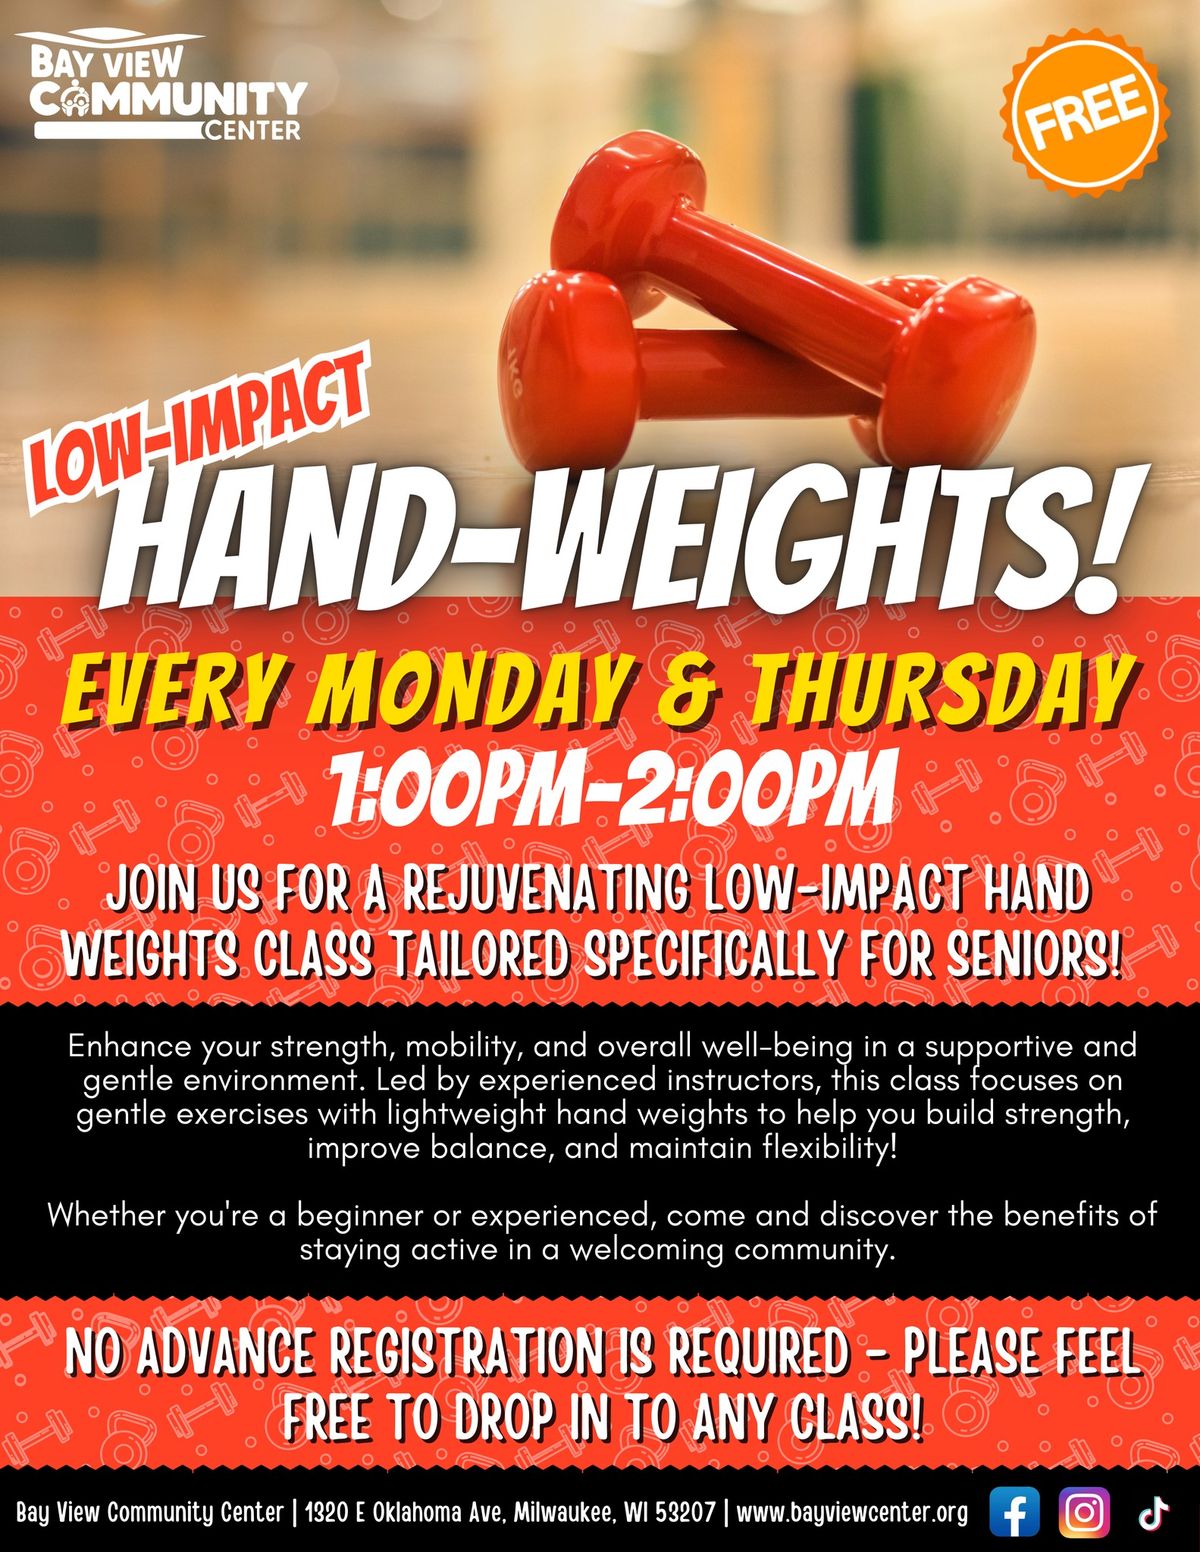 Low-Impact Hand-Weights! 